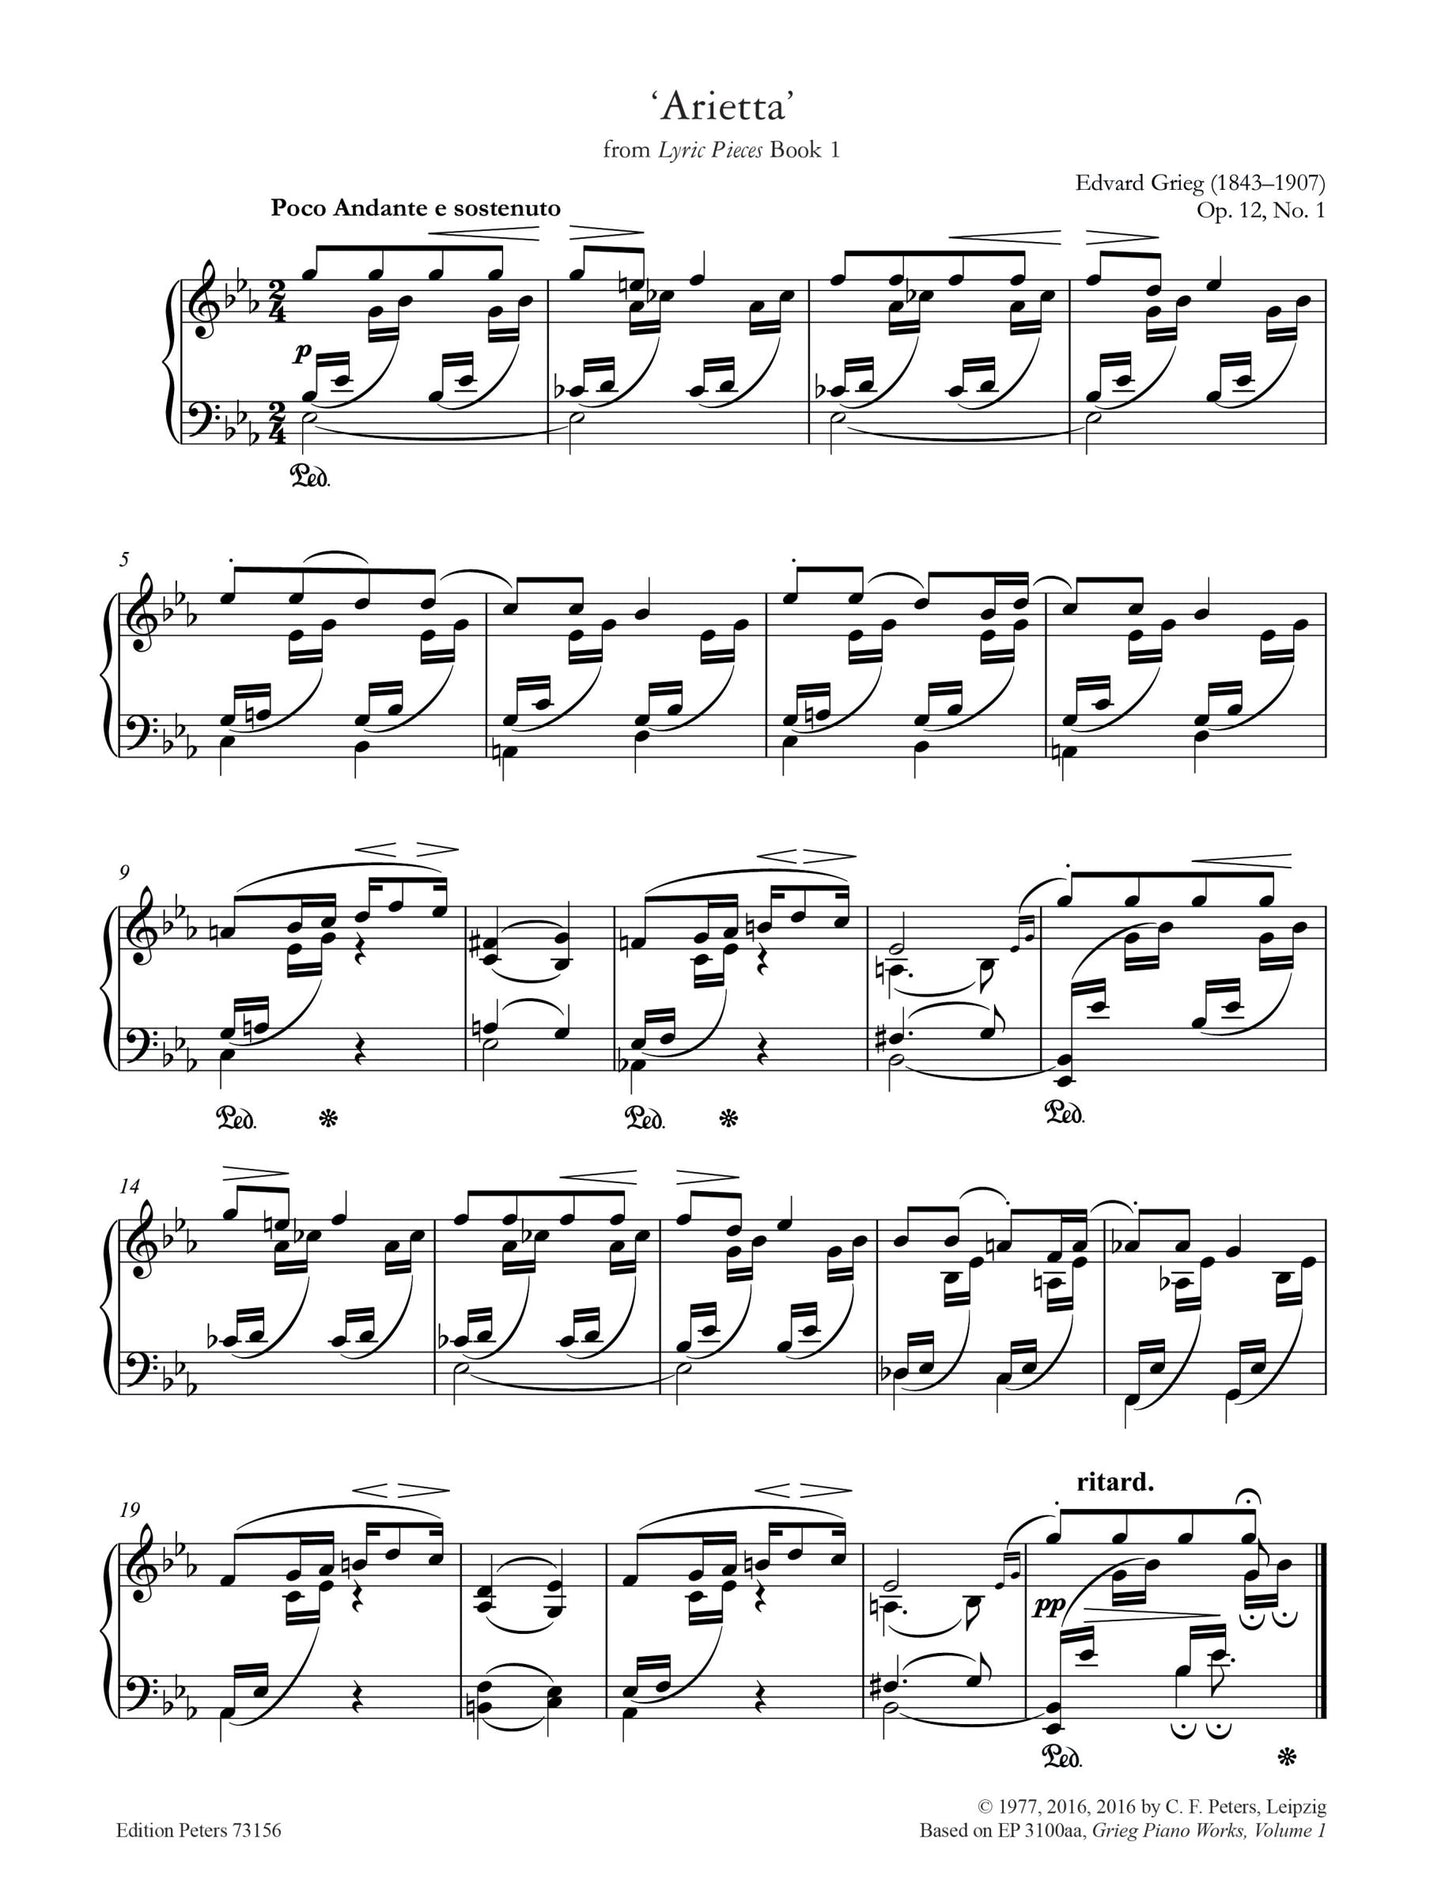 More Than The Score: Grieg - Arietta from Lyric Pieces Book 1 (Piano Solo)